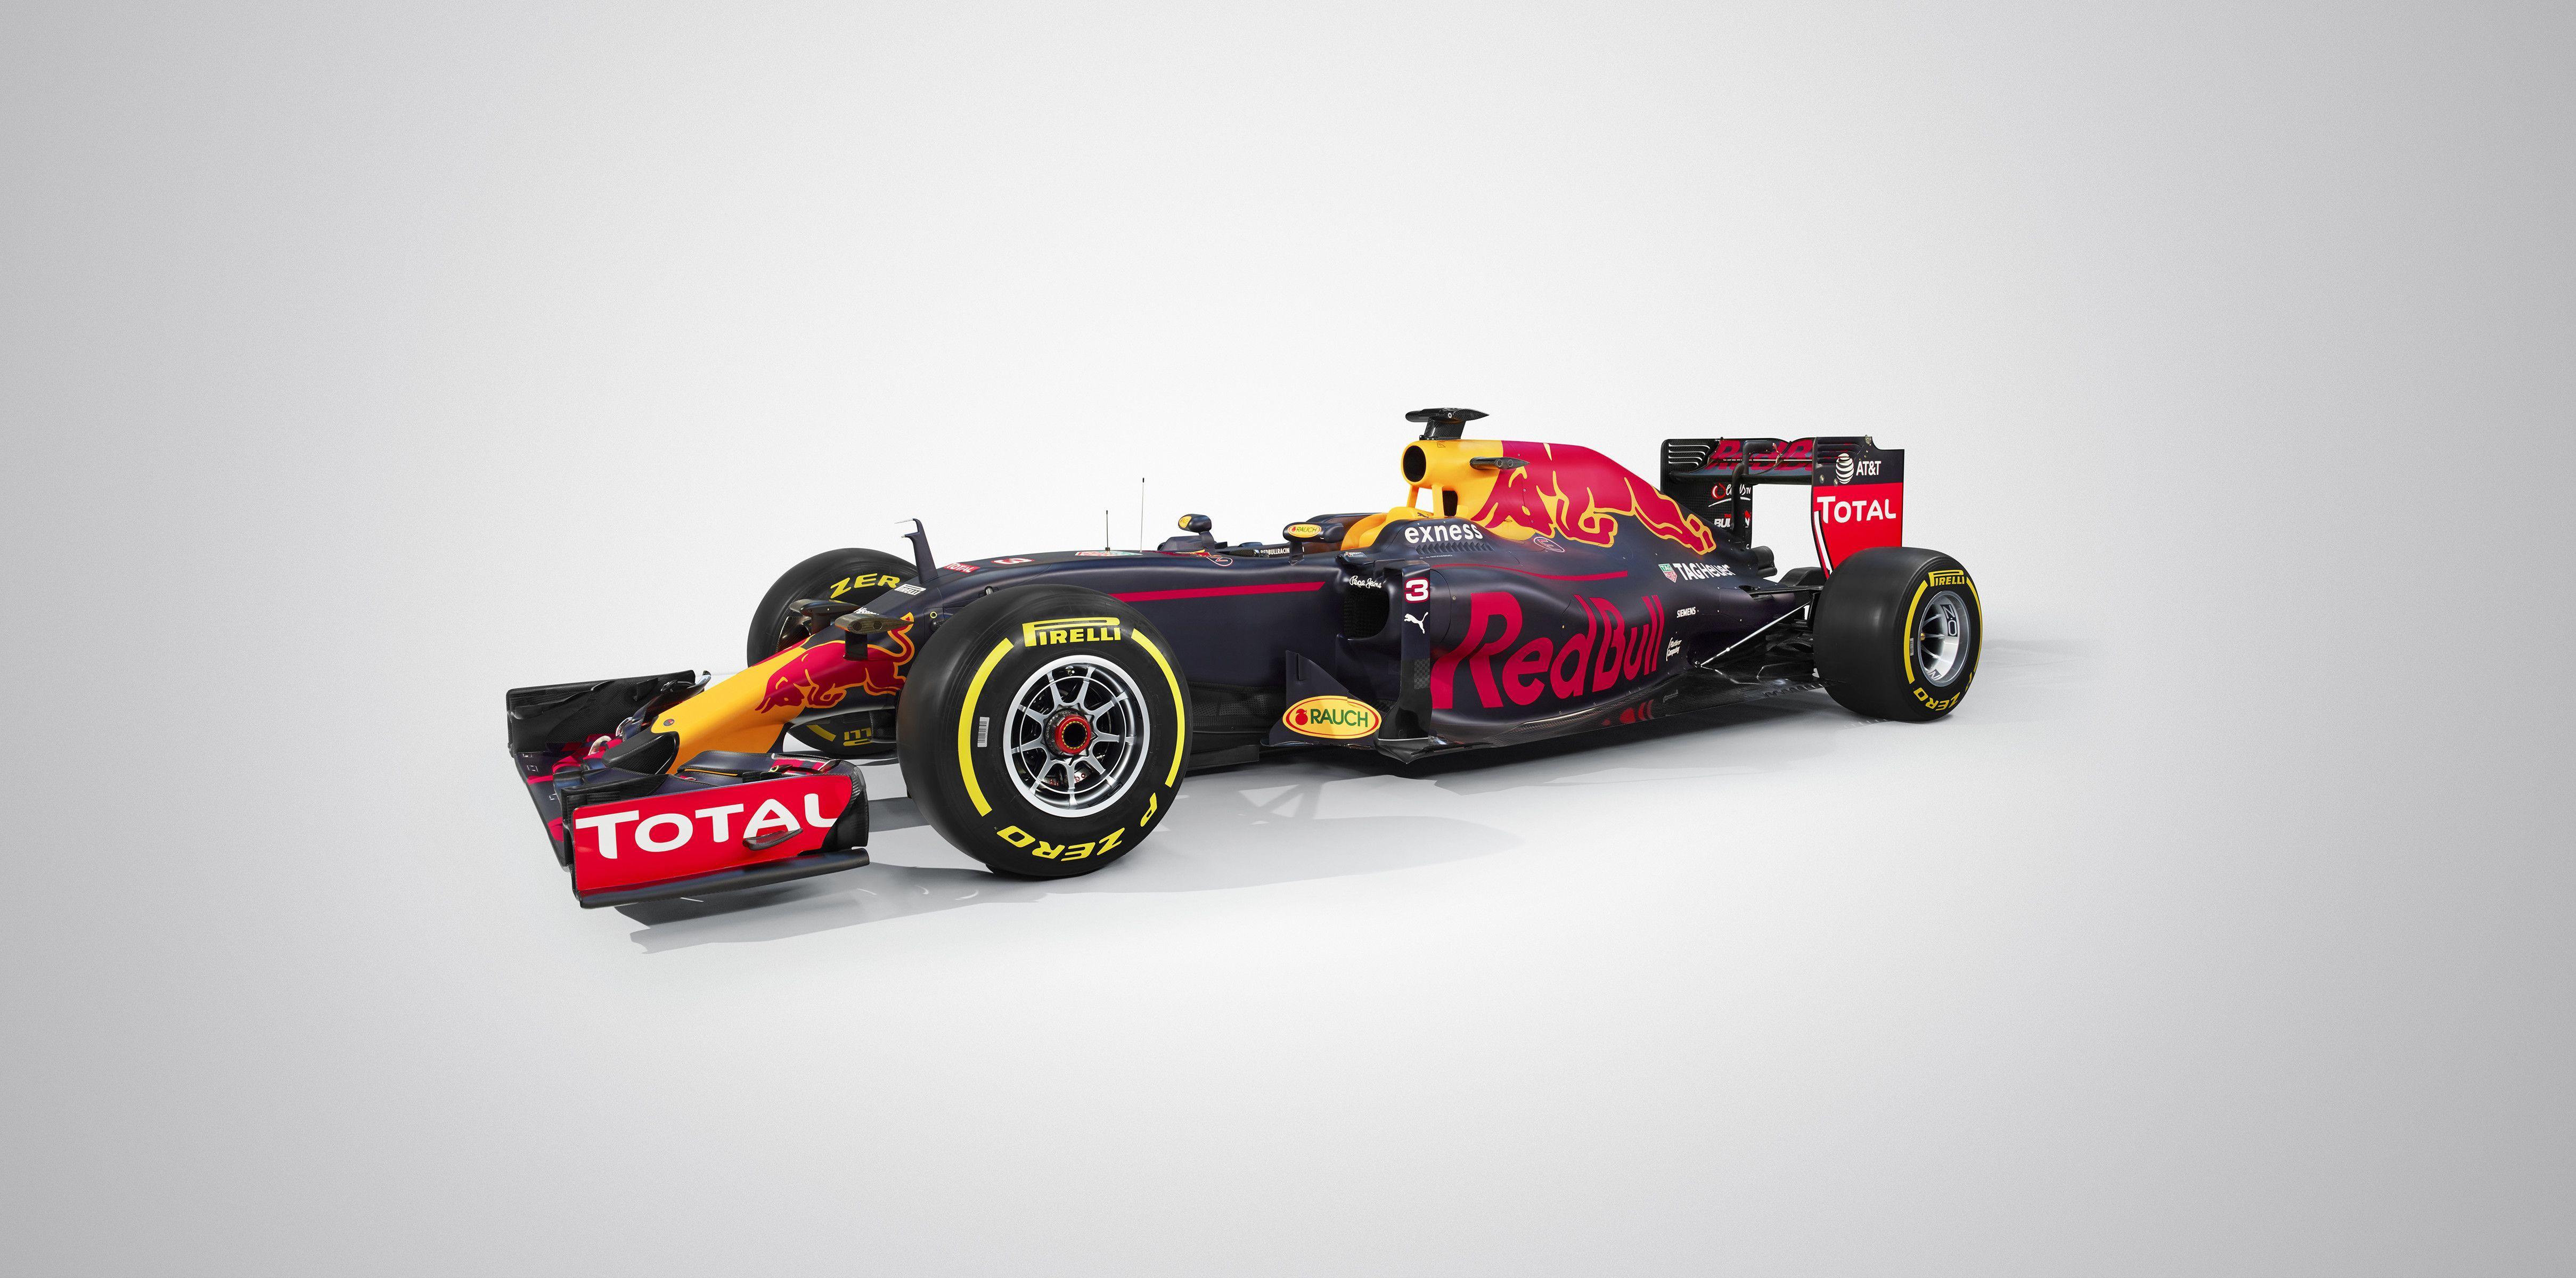 Red Bull Racing reveal RB12